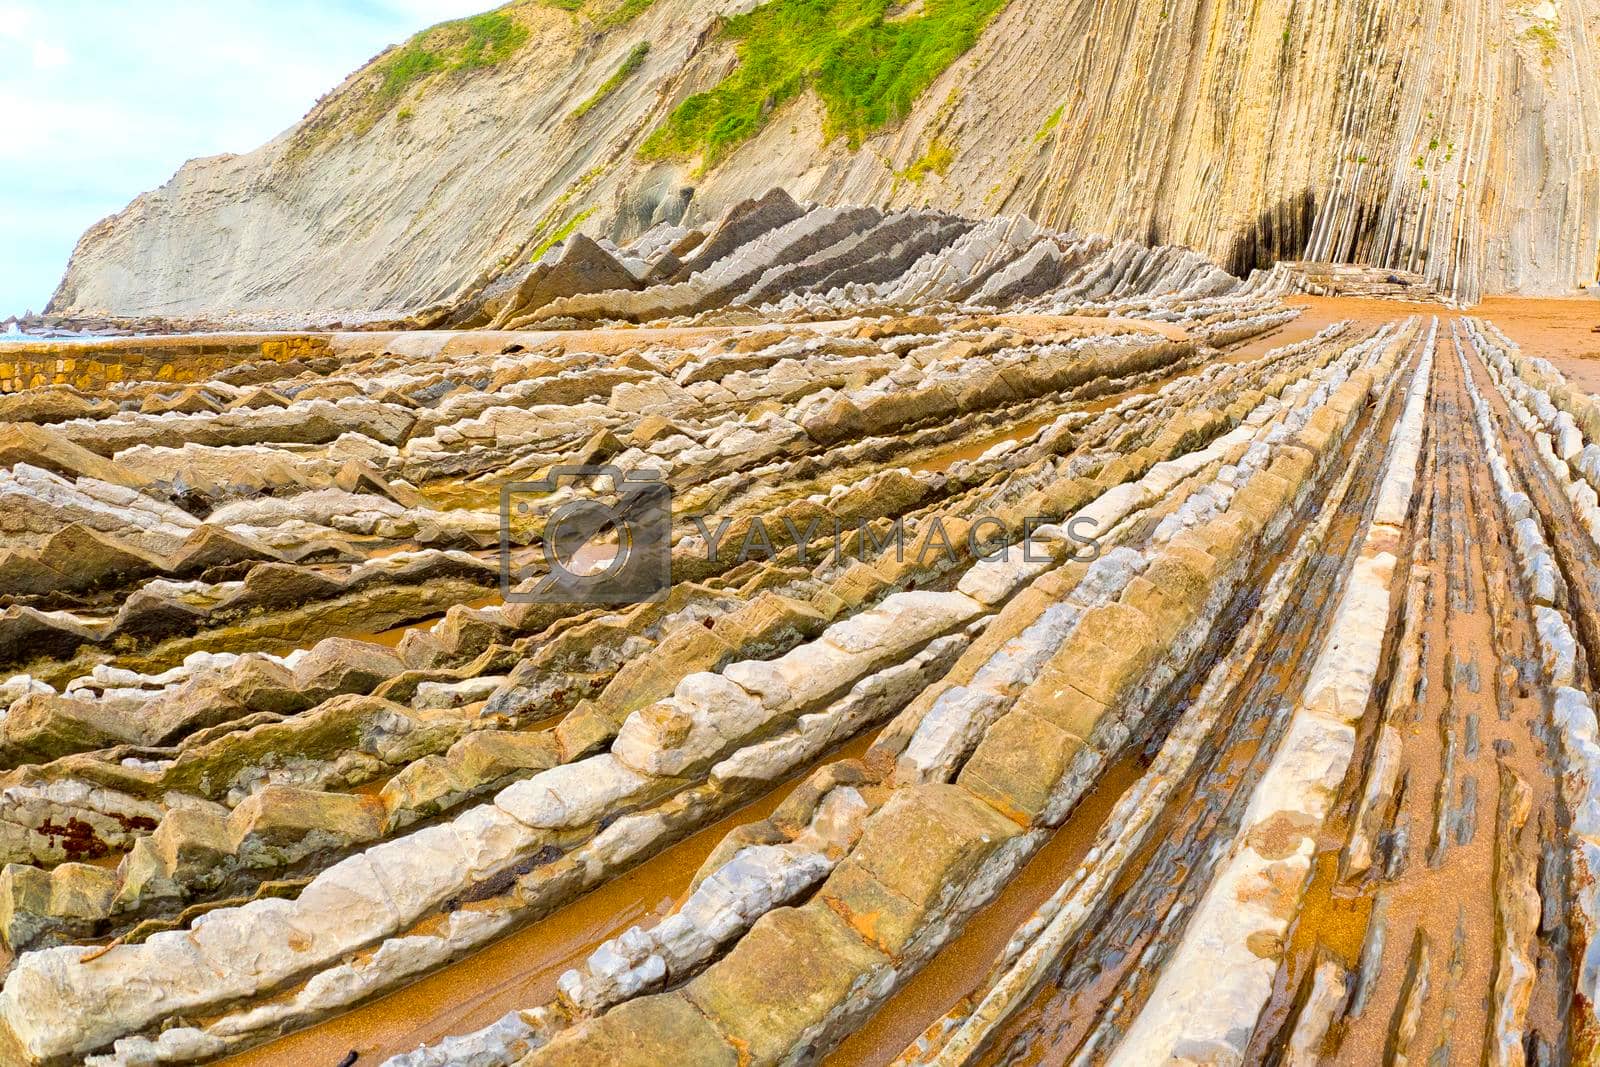 Royalty free image of Steeply-tilted Layers of Flysch, Basque Coast UNESCO Global Geopark, Spain by alcaproac